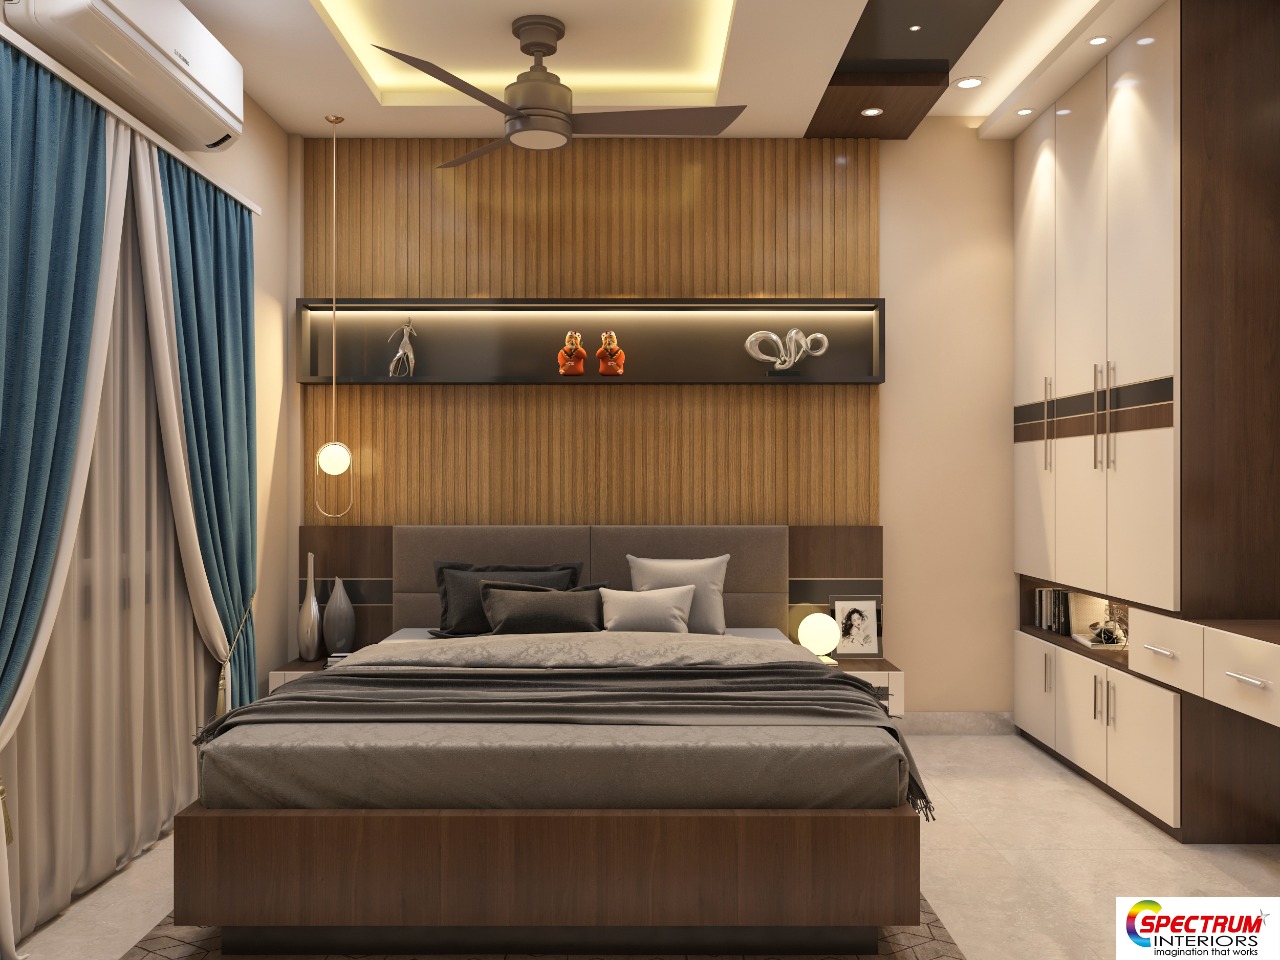 Incredible Assortment of Full 4K Bedroom Interior Images - Over 999 ...